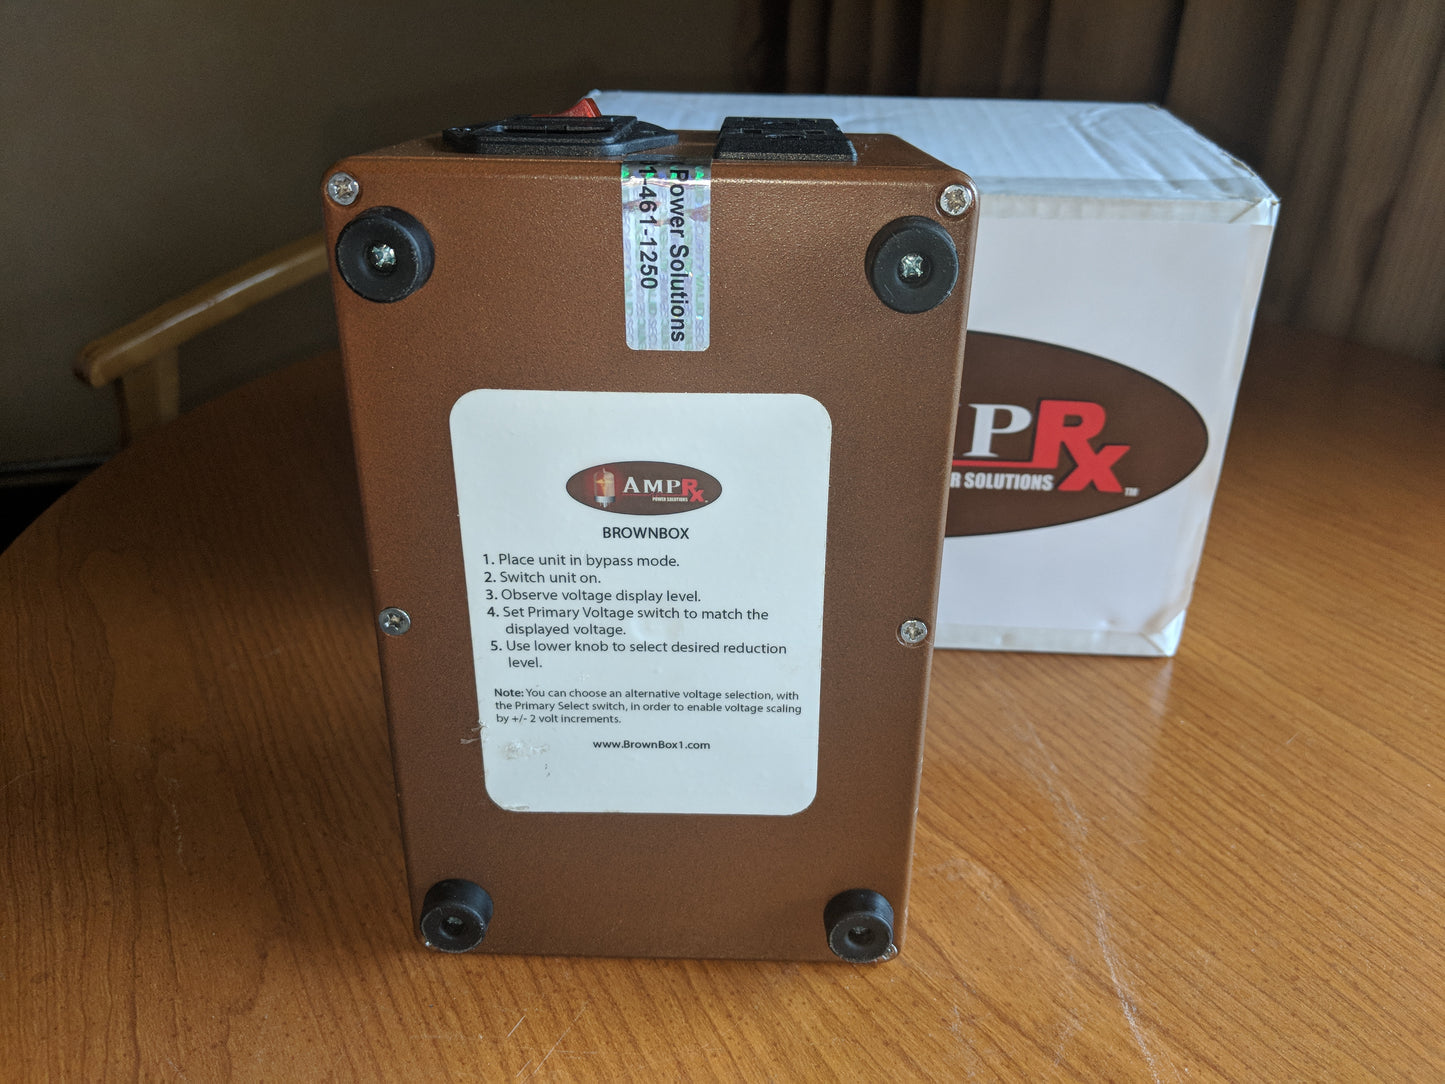 Used AmpRx Power Solutions - Brown Box - Power/Voltage Attenuator